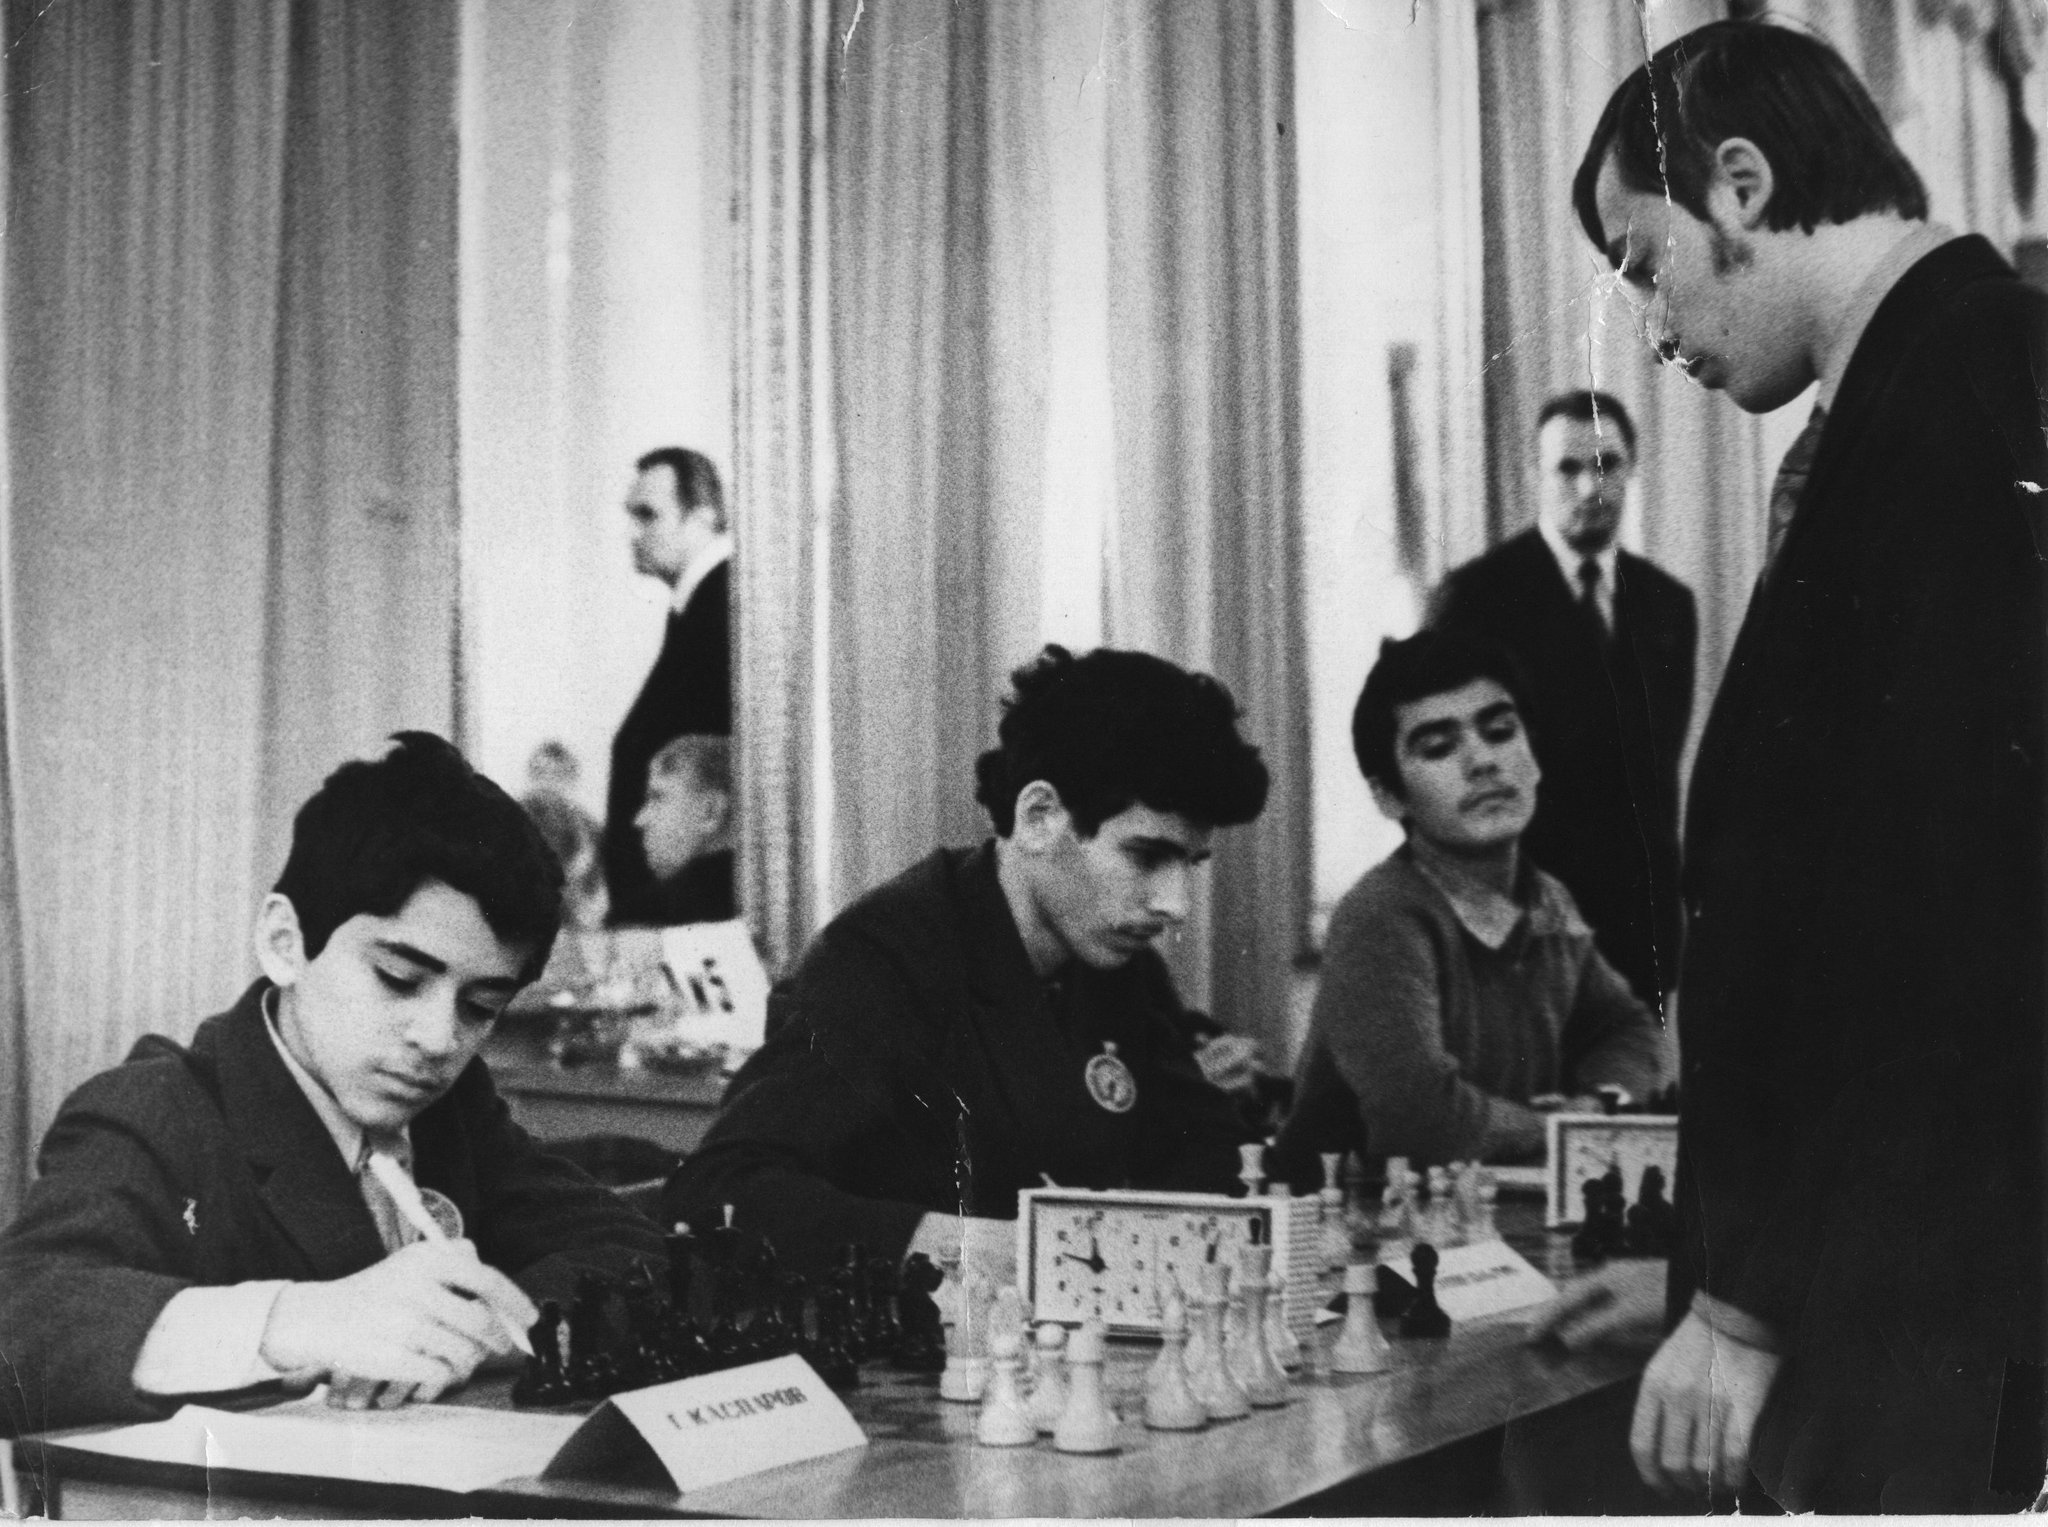 Douglas Griffin on X: Two photos from the epic 1985 World Championship  match between Anatoly Karpov and Garry Kasparov, which took place during  September-November in the Tchaikovsky Concert Hall in the Soviet